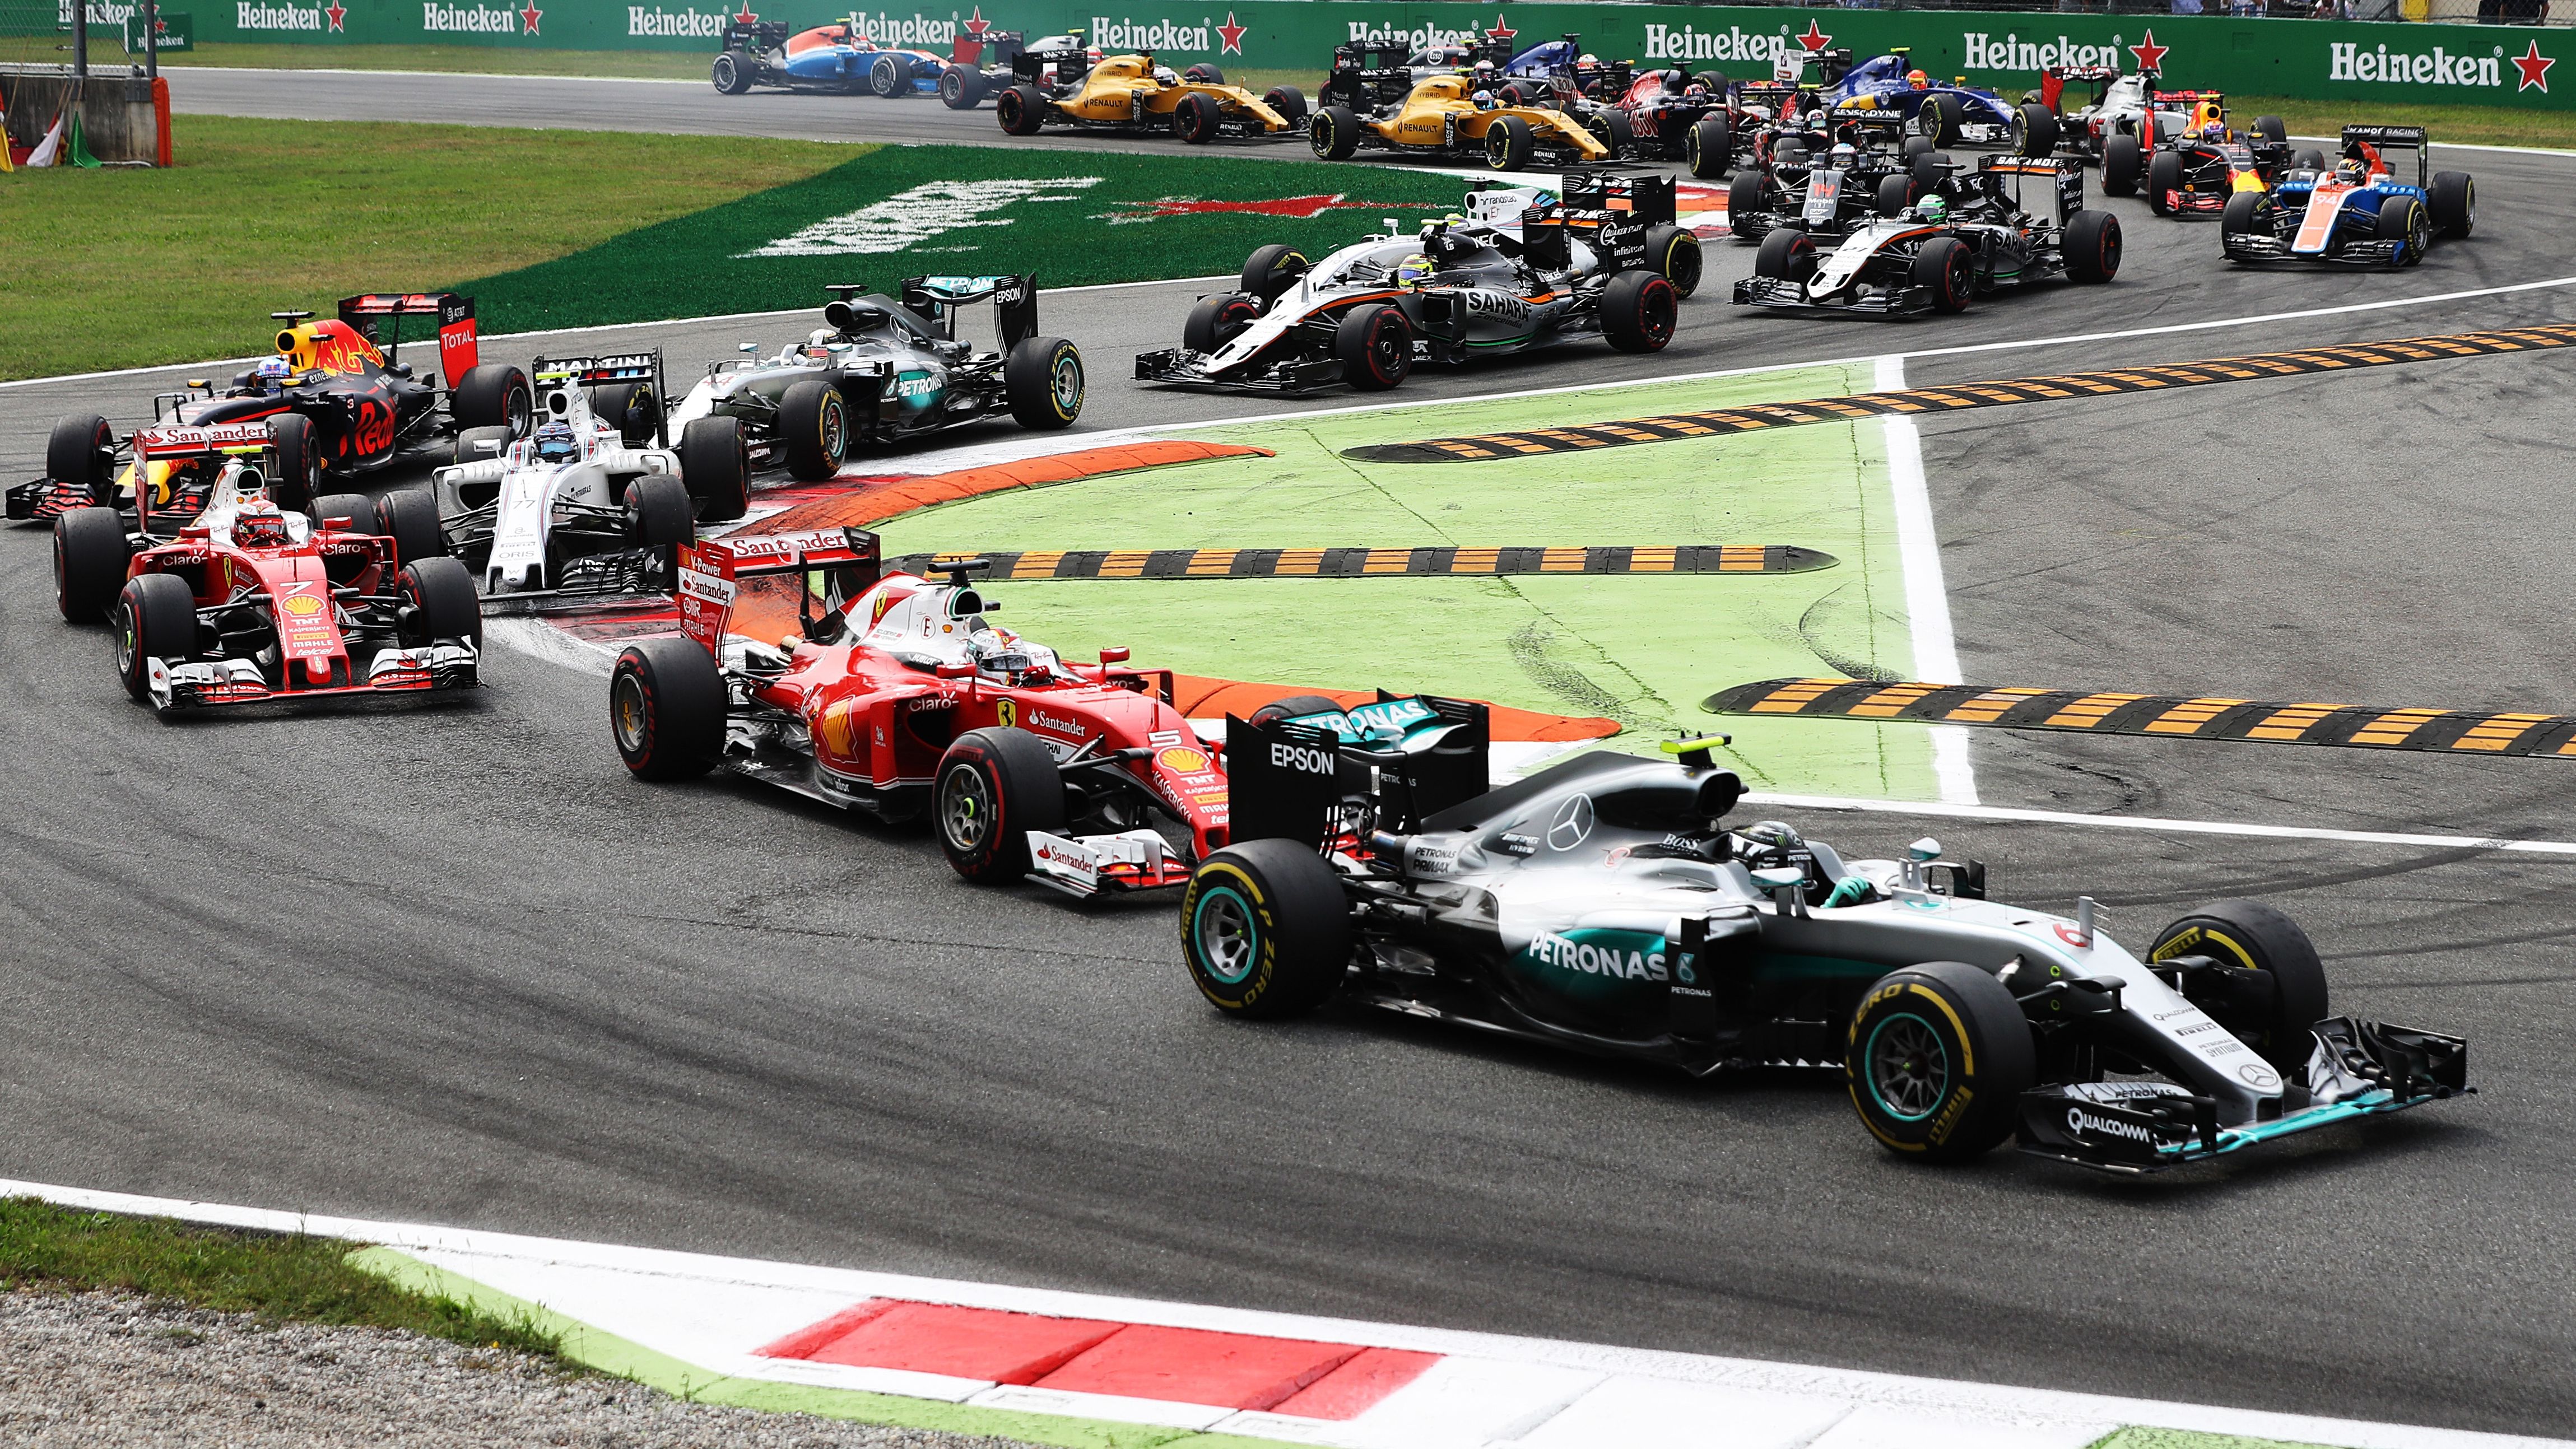 Nico Rosberg leads the Italian Grand Prix at the start after a slow get away by Mercedes team mate Lewis Hamilton.